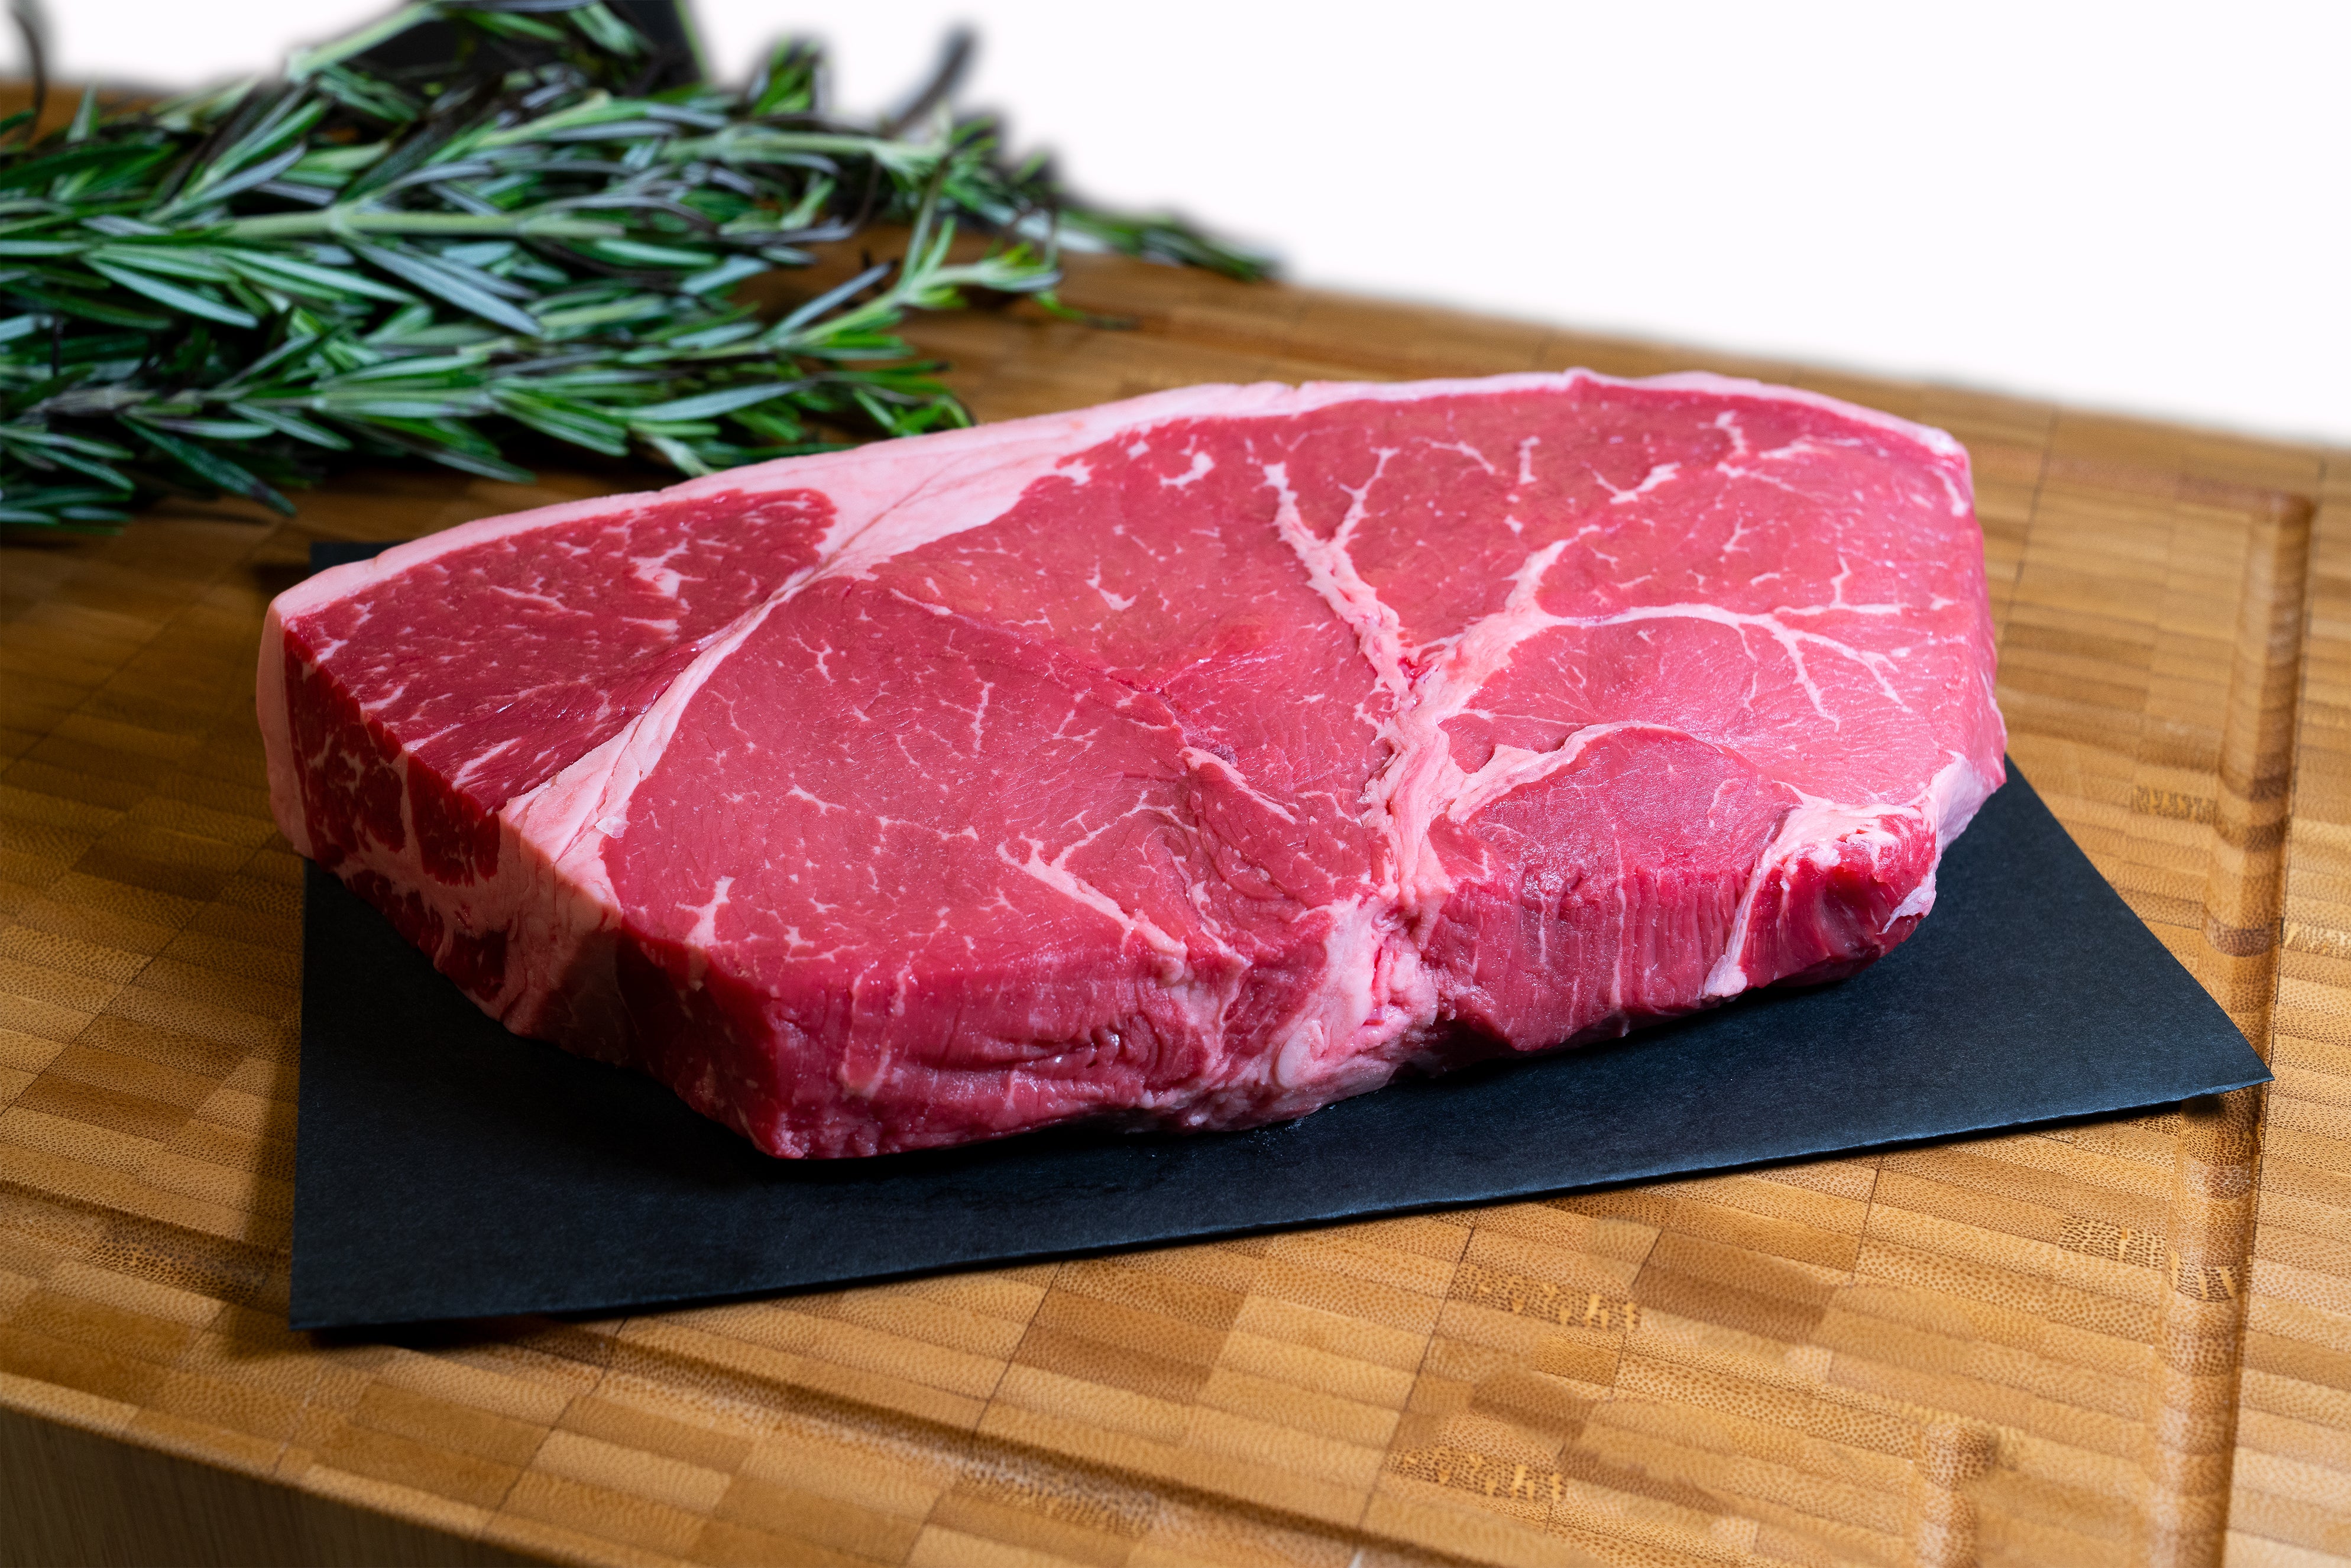 Private Selection® Culinary Cuts Prime Beef Top Sirloin Steak, 8